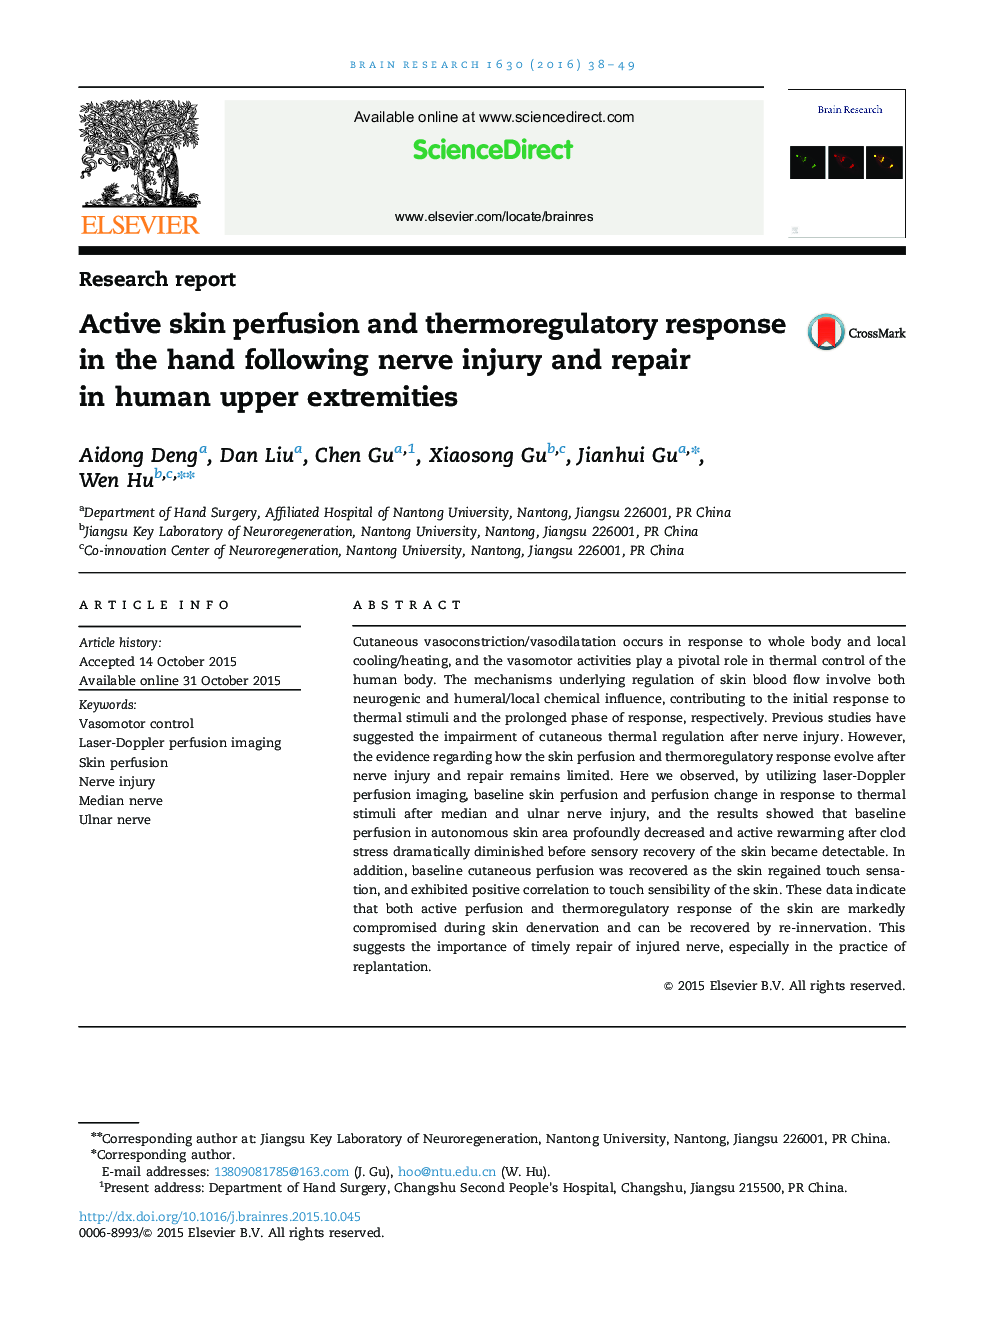 Research reportActive skin perfusion and thermoregulatory response in the hand following nerve injury and repair in human upper extremities